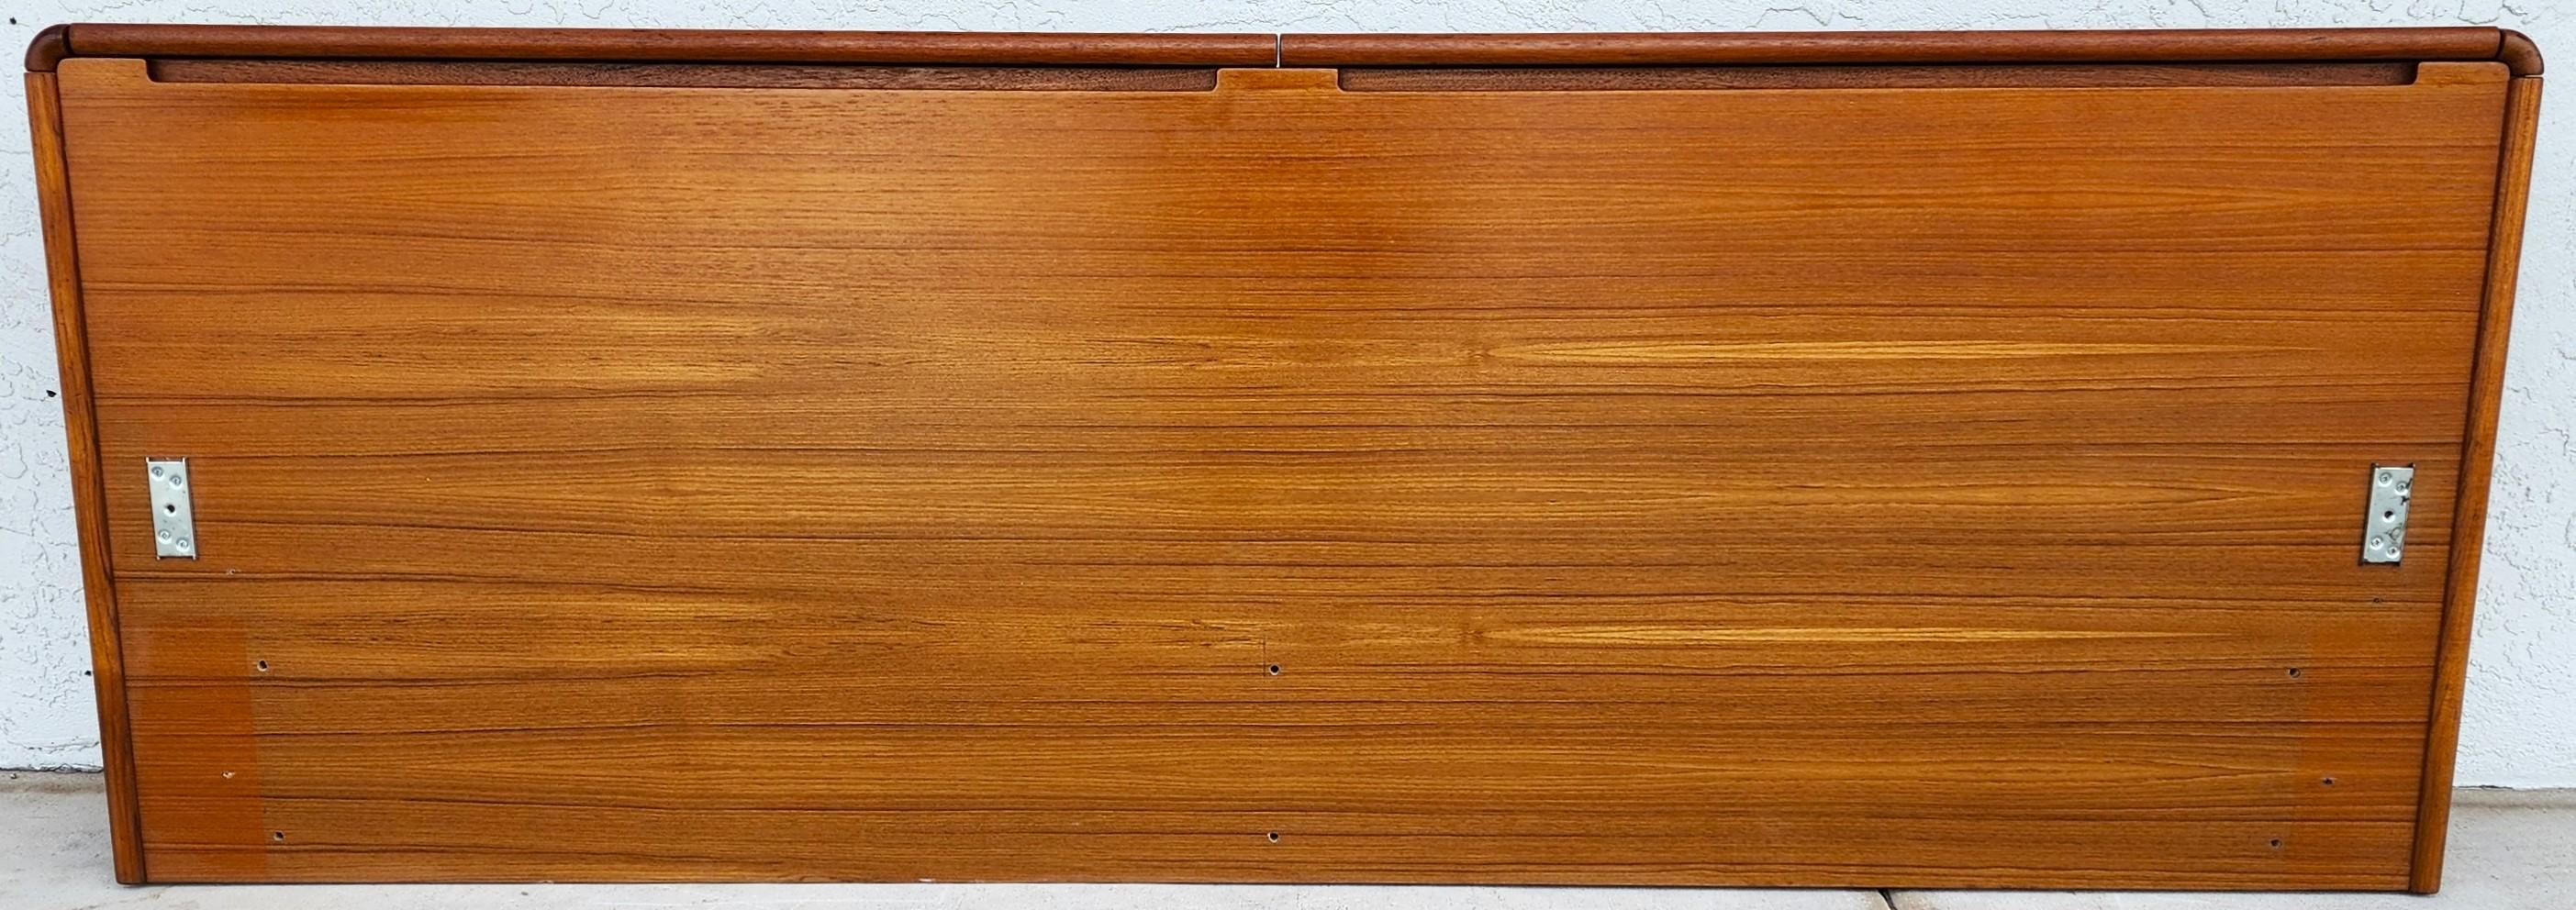 For FULL item description click on CONTINUE READING at the bottom of this page.

Offering One Of Our Recent Palm Beach Estate Fine Furniture Acquisitions Of A
Vintage Mid-Century Modern King Headboard by Sun Cabinet Co.
There are 2 flip-top storage